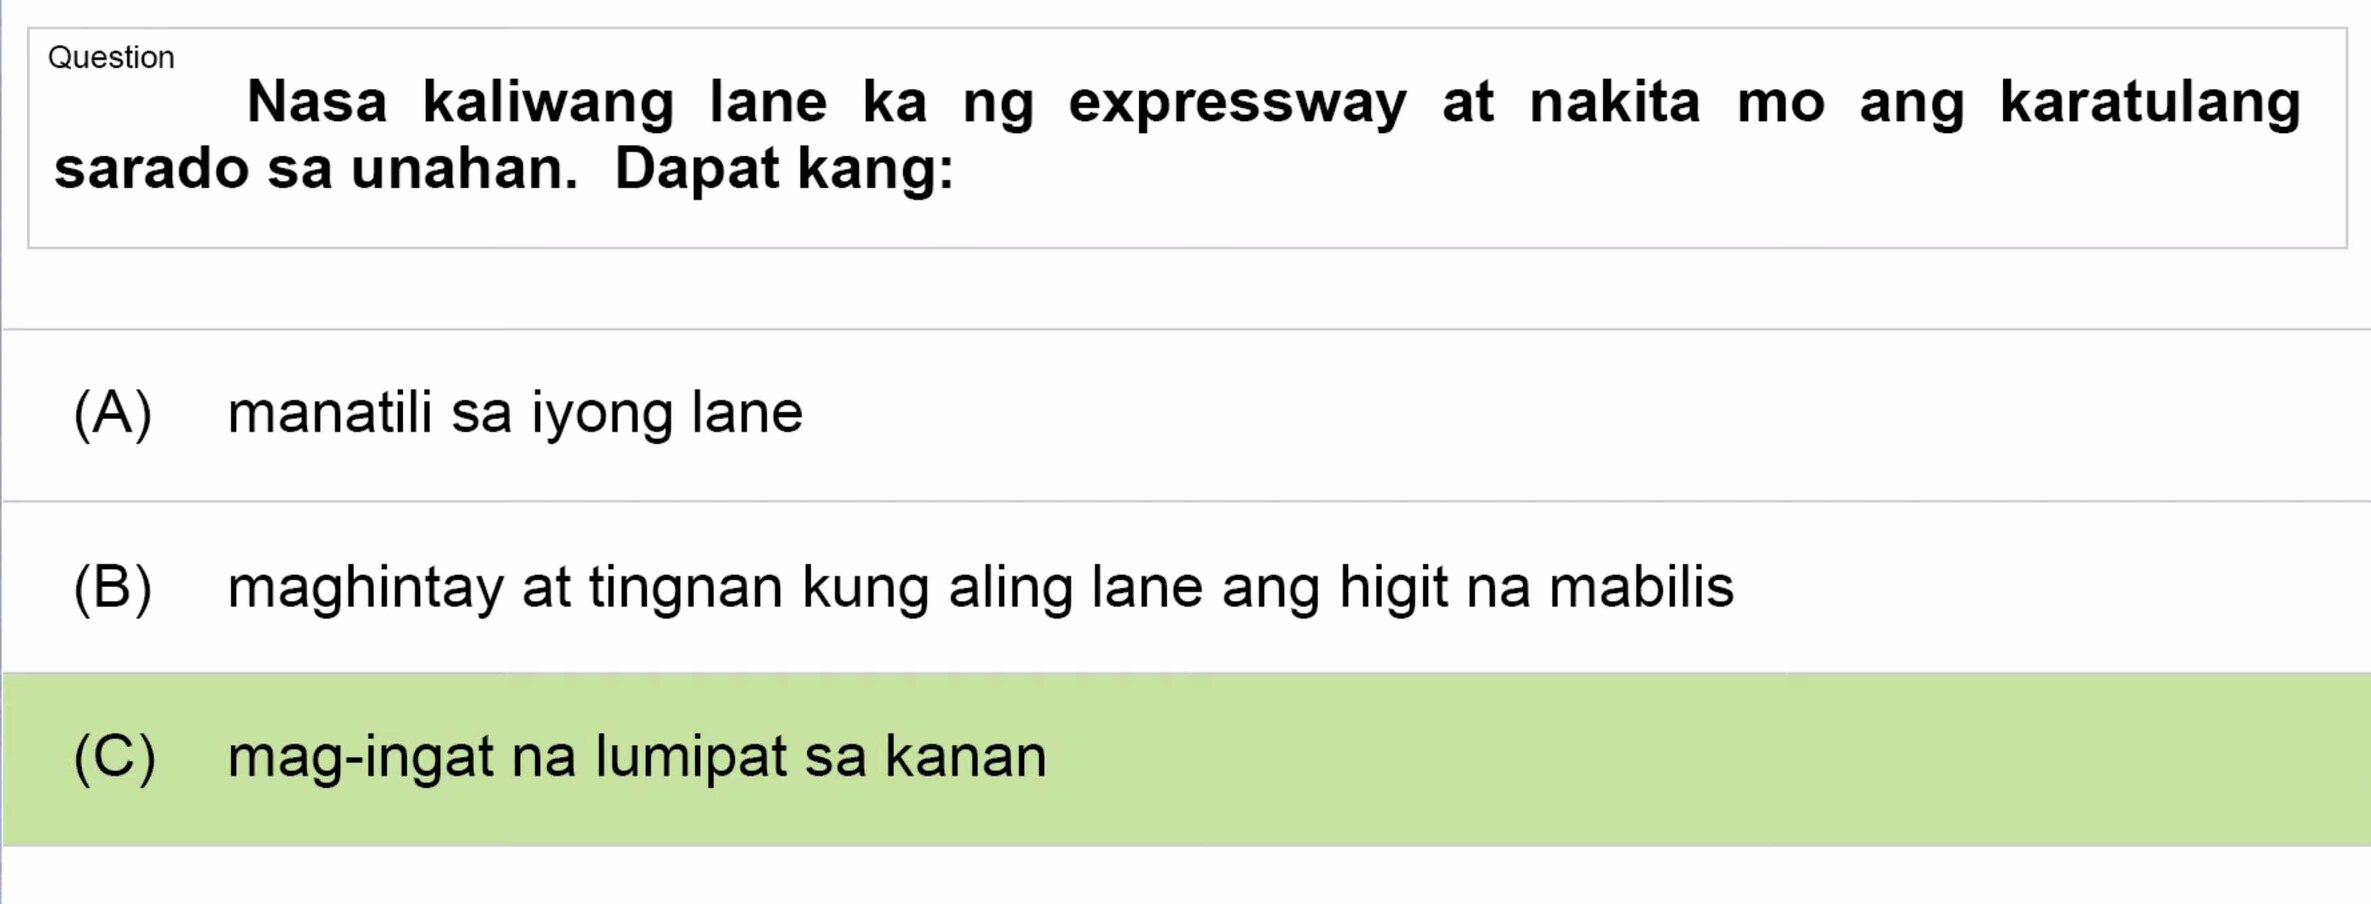 LTO Tagalog non professional exam reviewer light vehicle 1 (38)